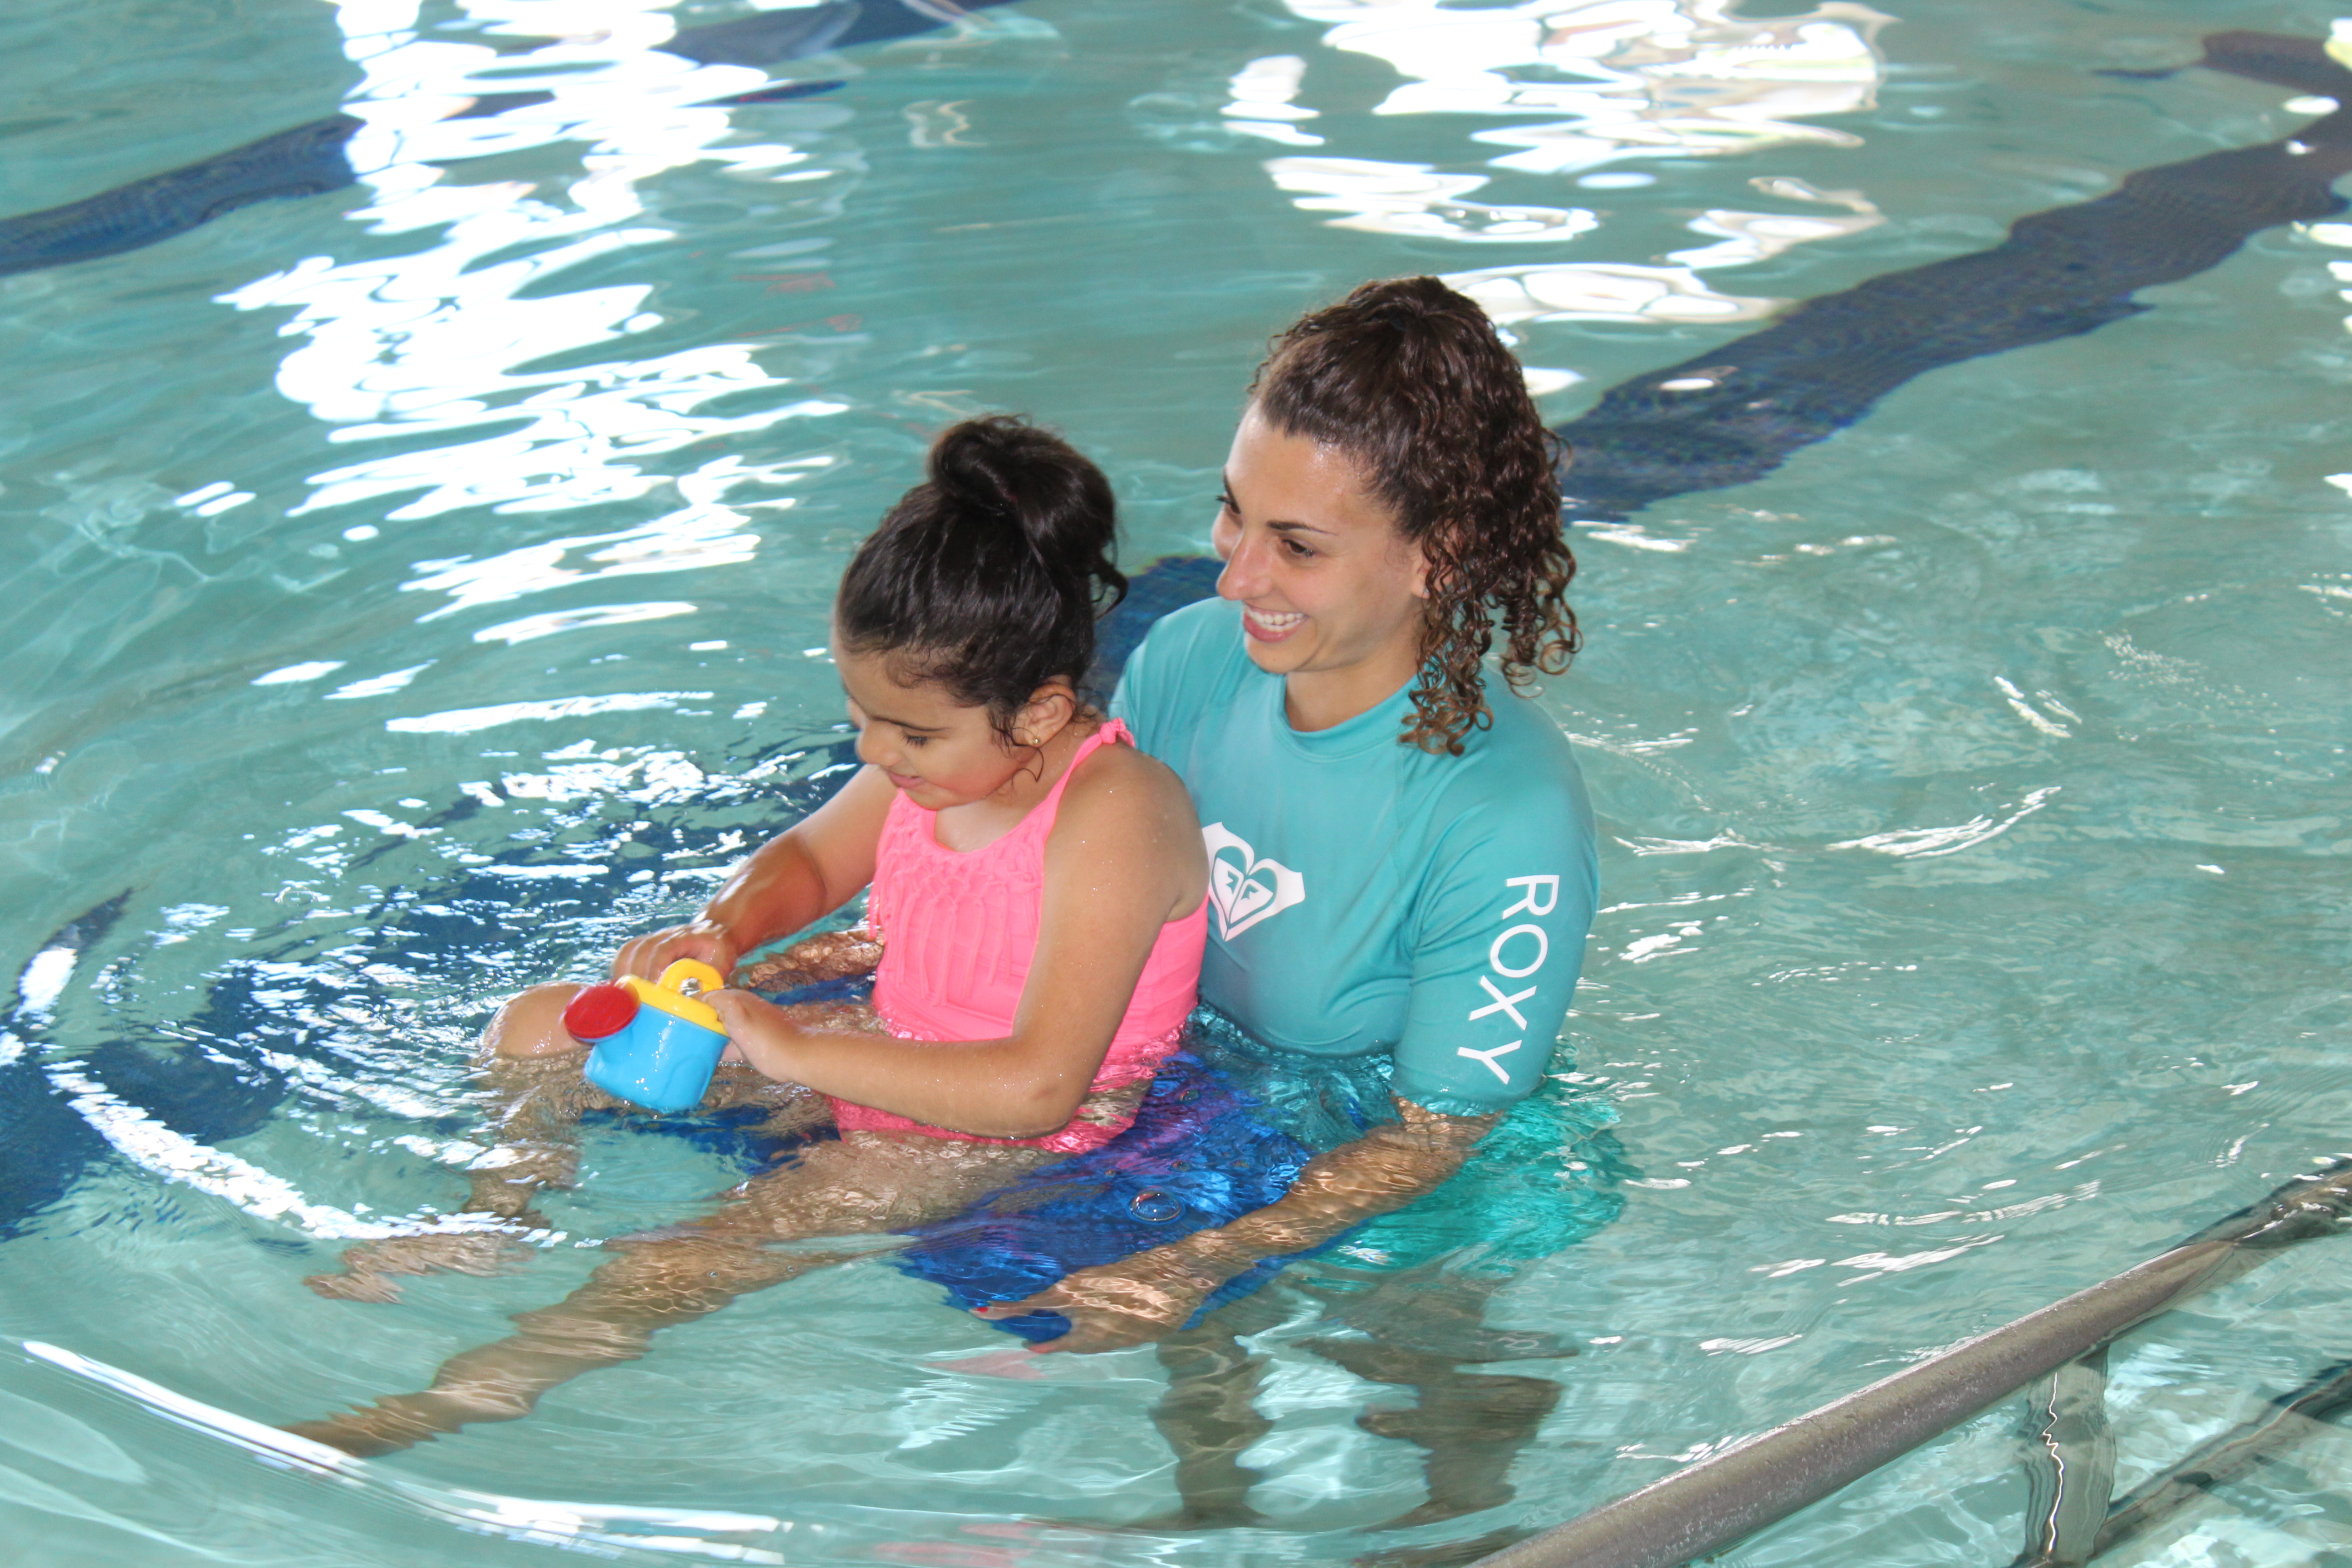 Aquatic Therapy Exercises For Children Improve Strength Balance